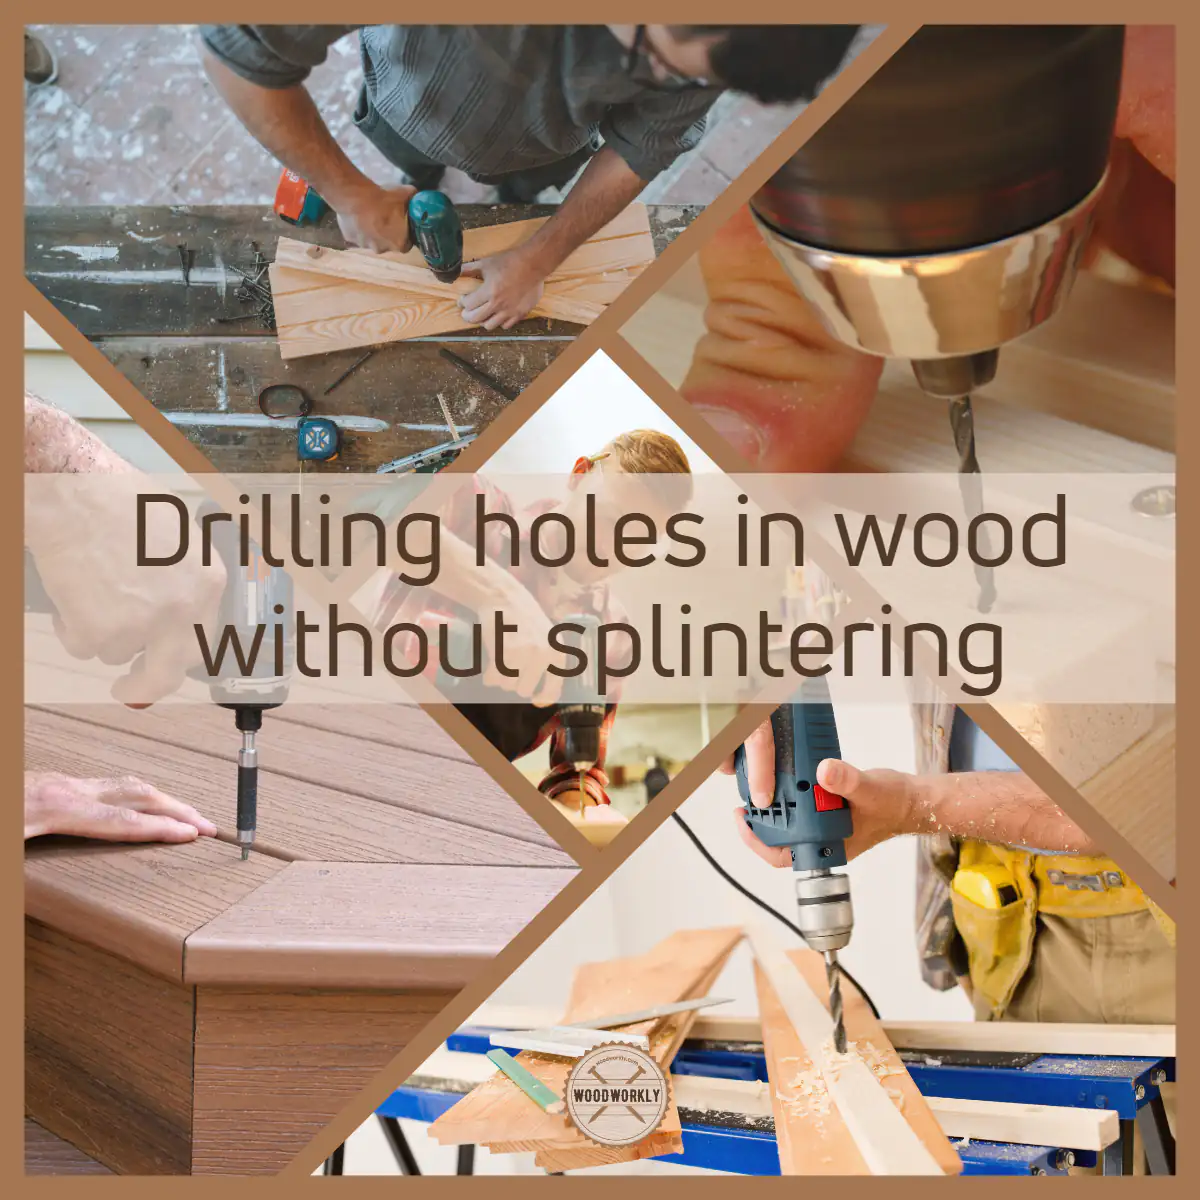 Drilling holes in wood without splintering